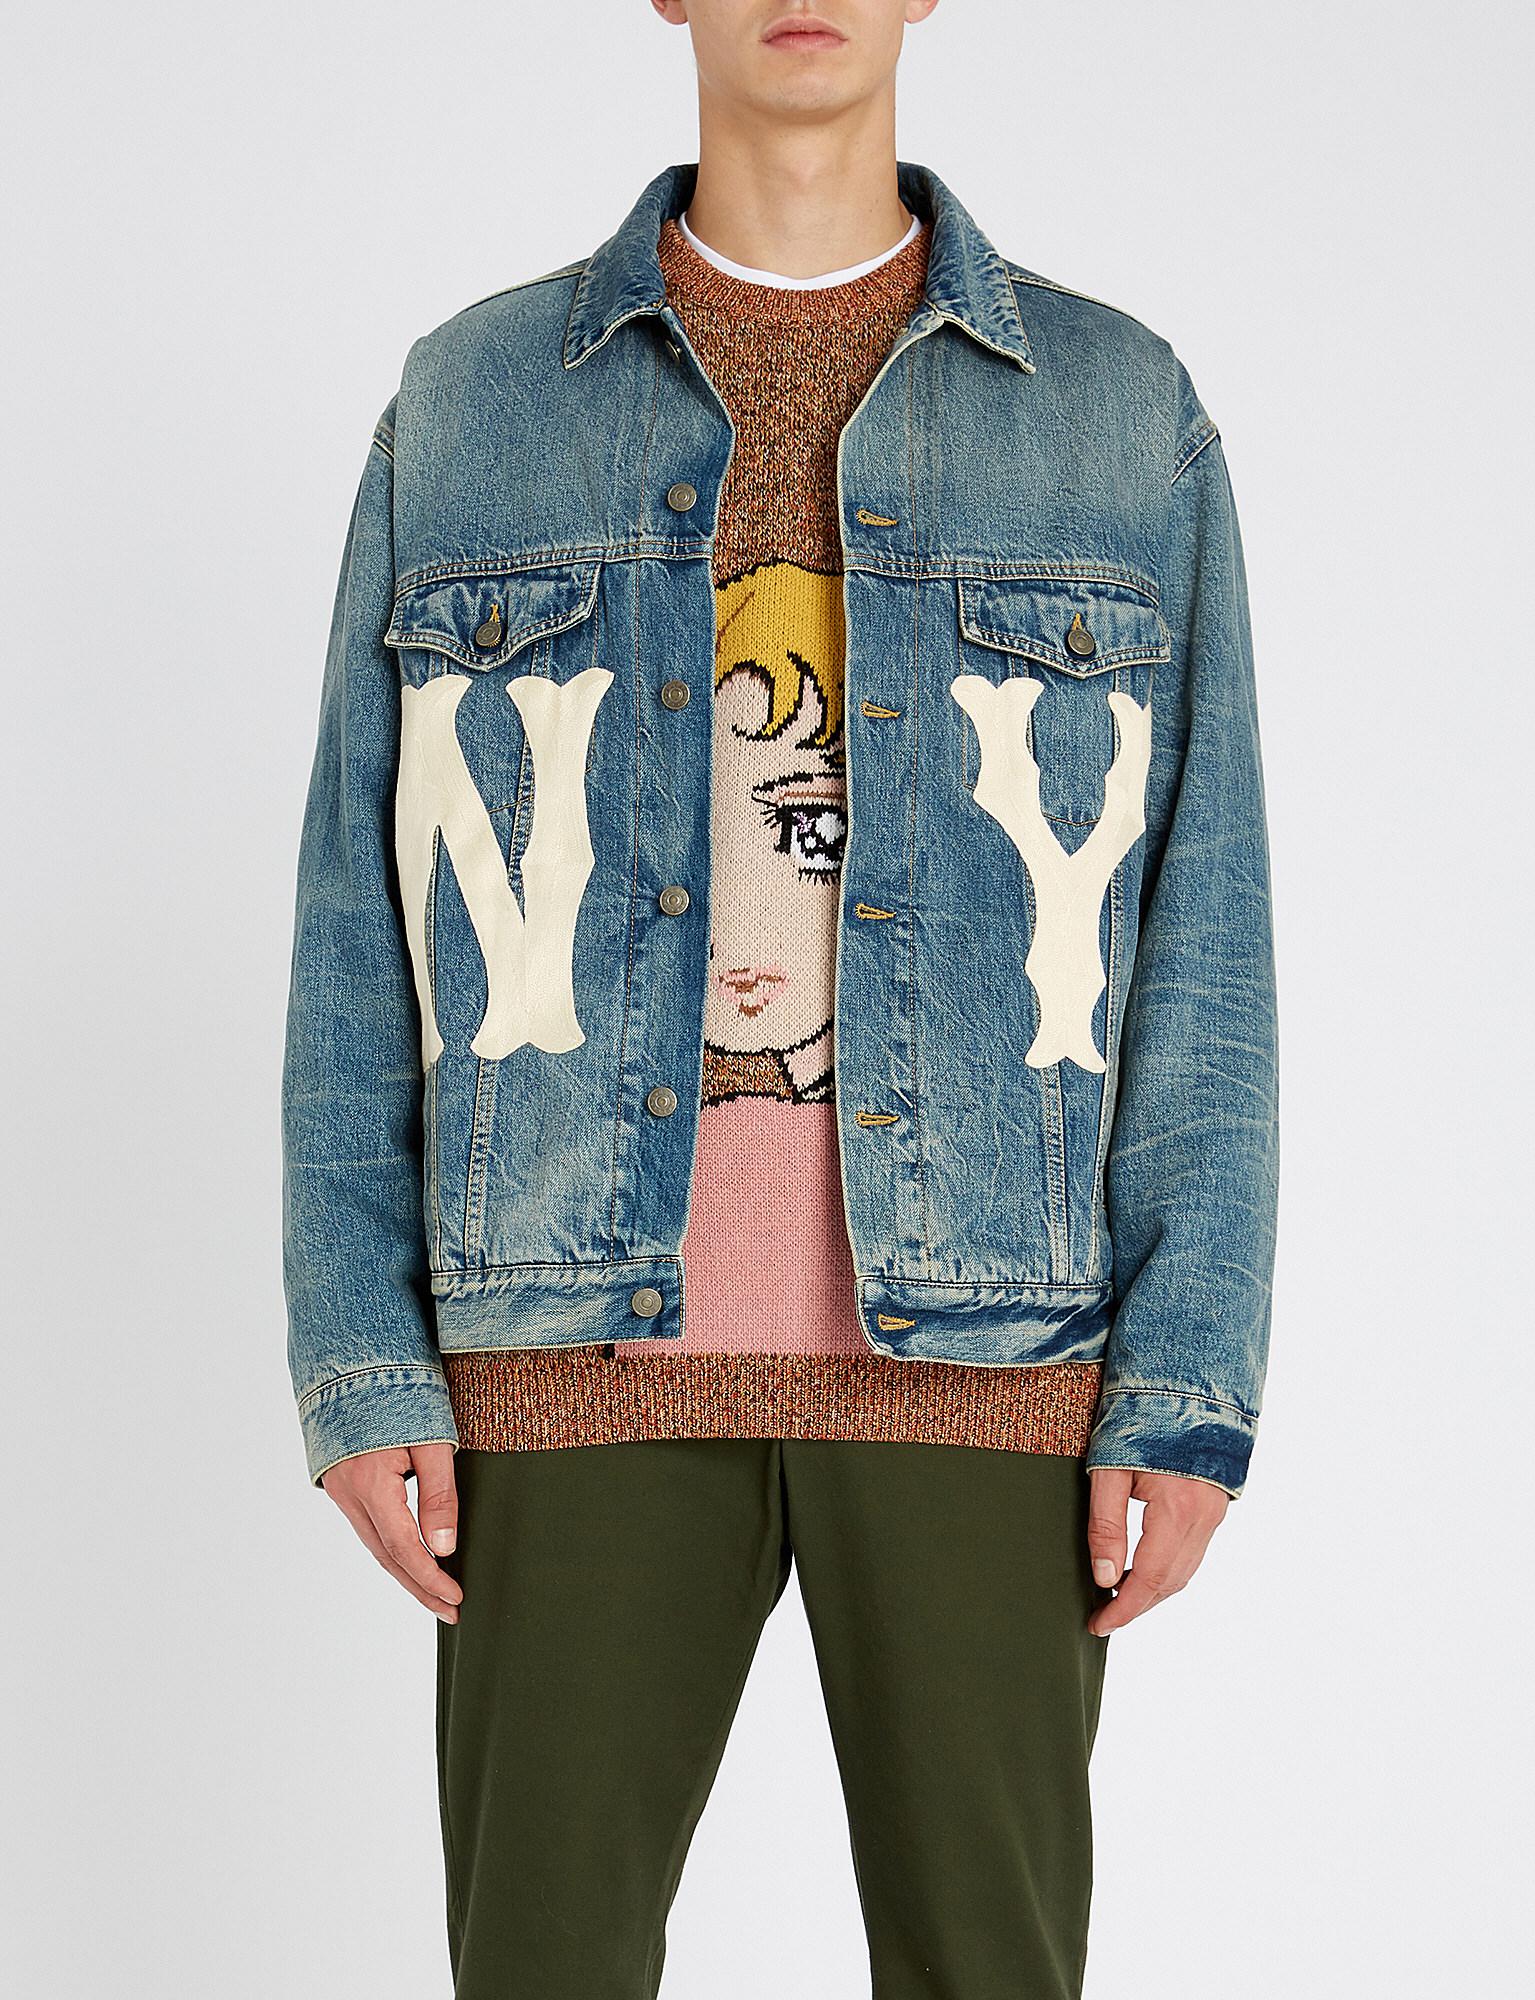 Gucci Ny Yankeestm Patch Denim Jacket in Blue for Men - Lyst